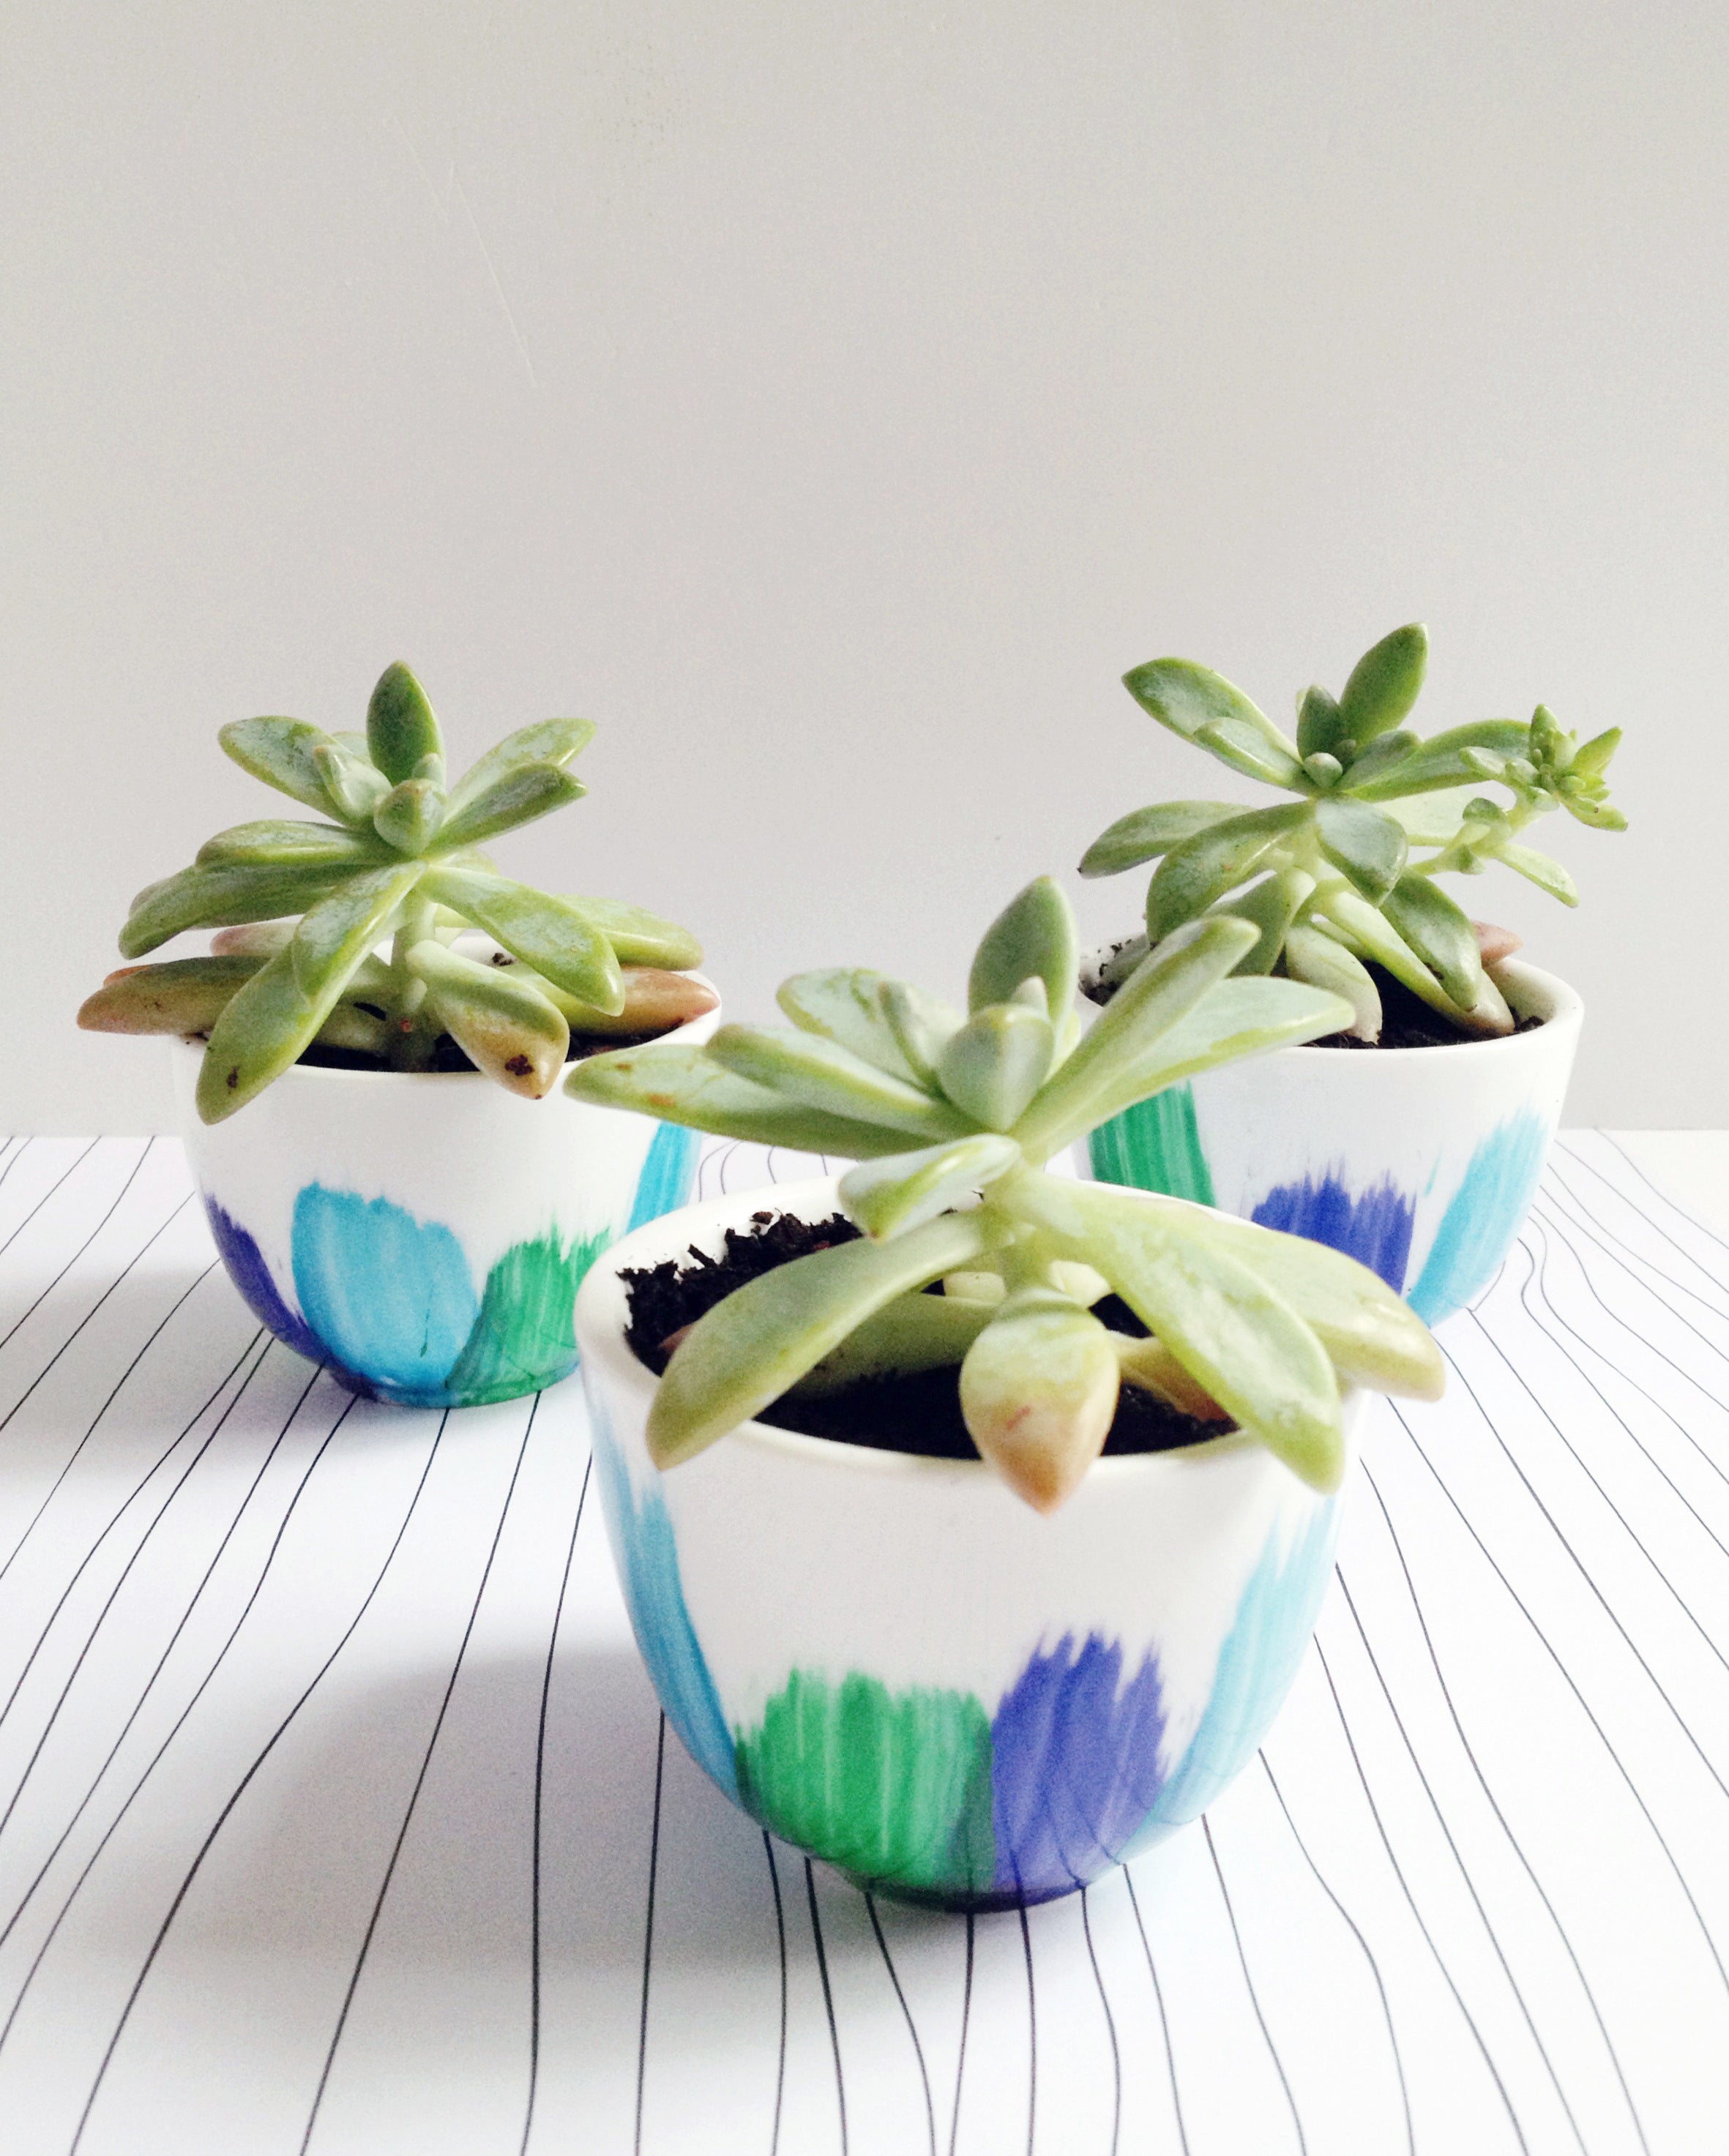 Snazzy Painted Planter Pots